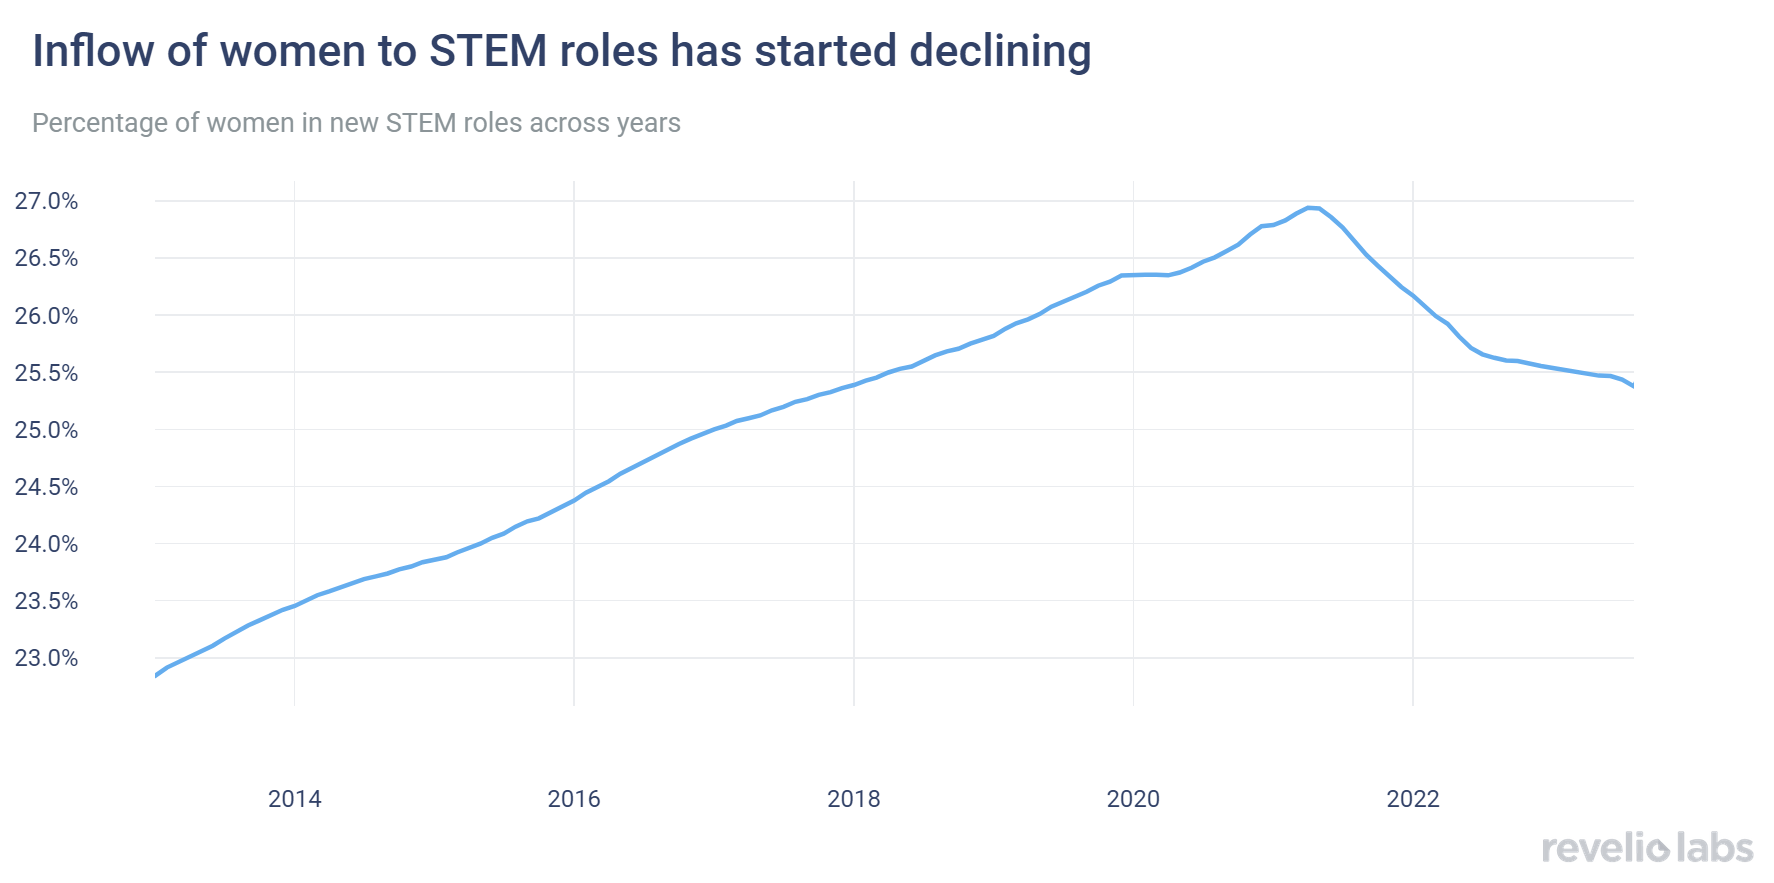 Inflow of women to STEM roles has started declining